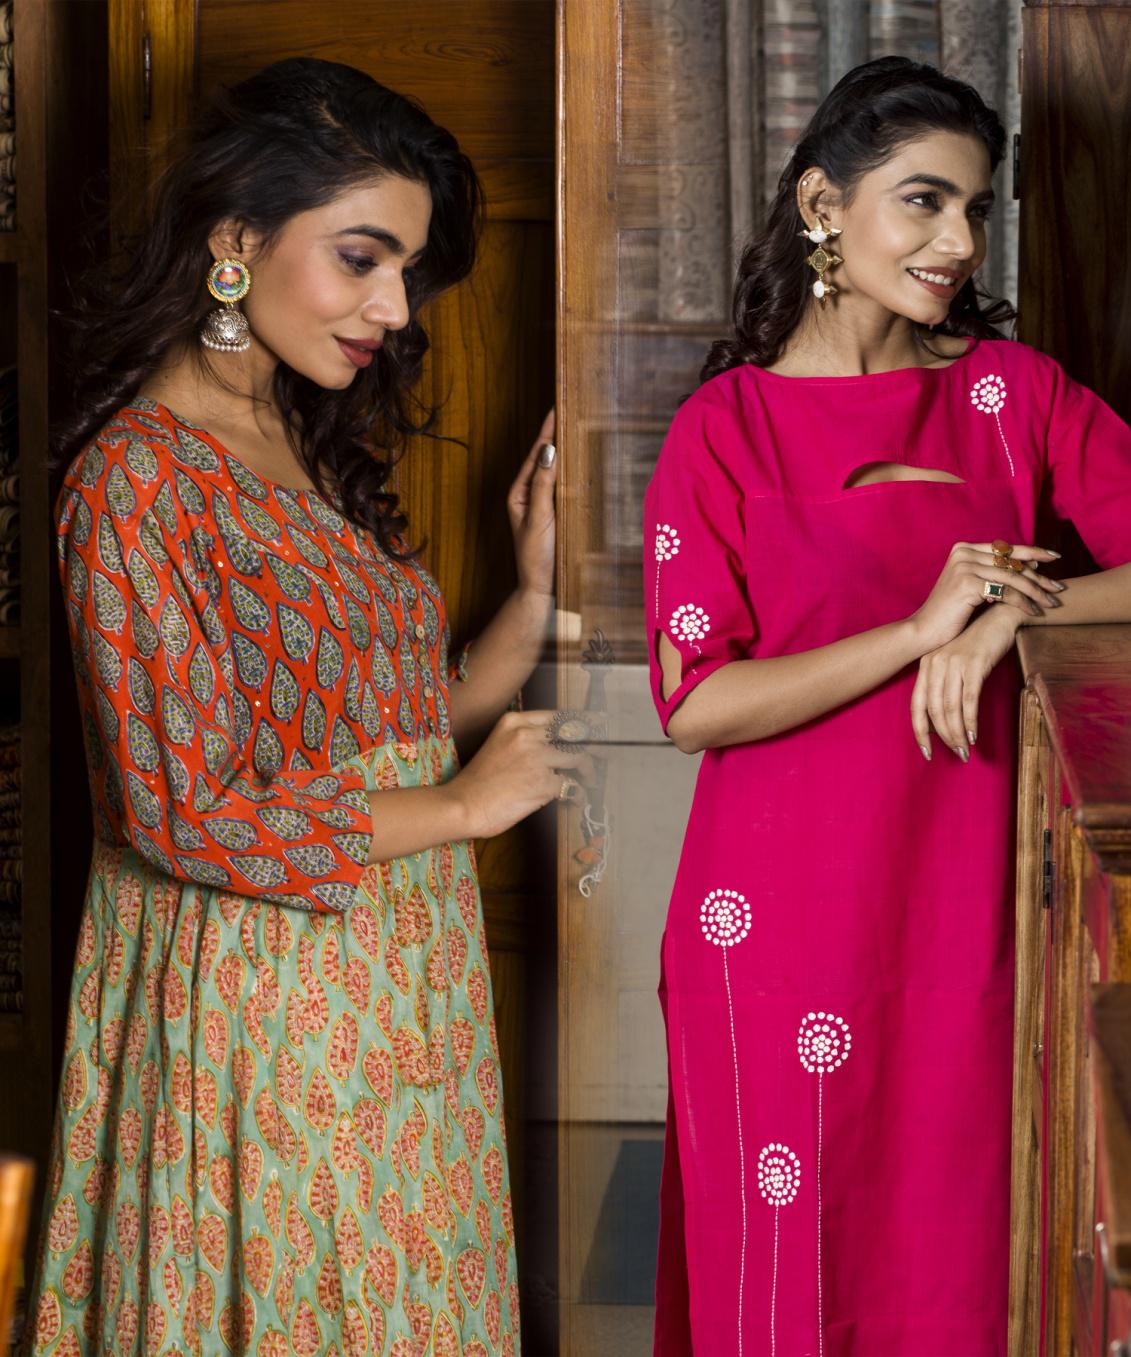 Top 5 Indo Western Kurtis Styles You Must Buy Before 2016 Ends – MISSPRINT